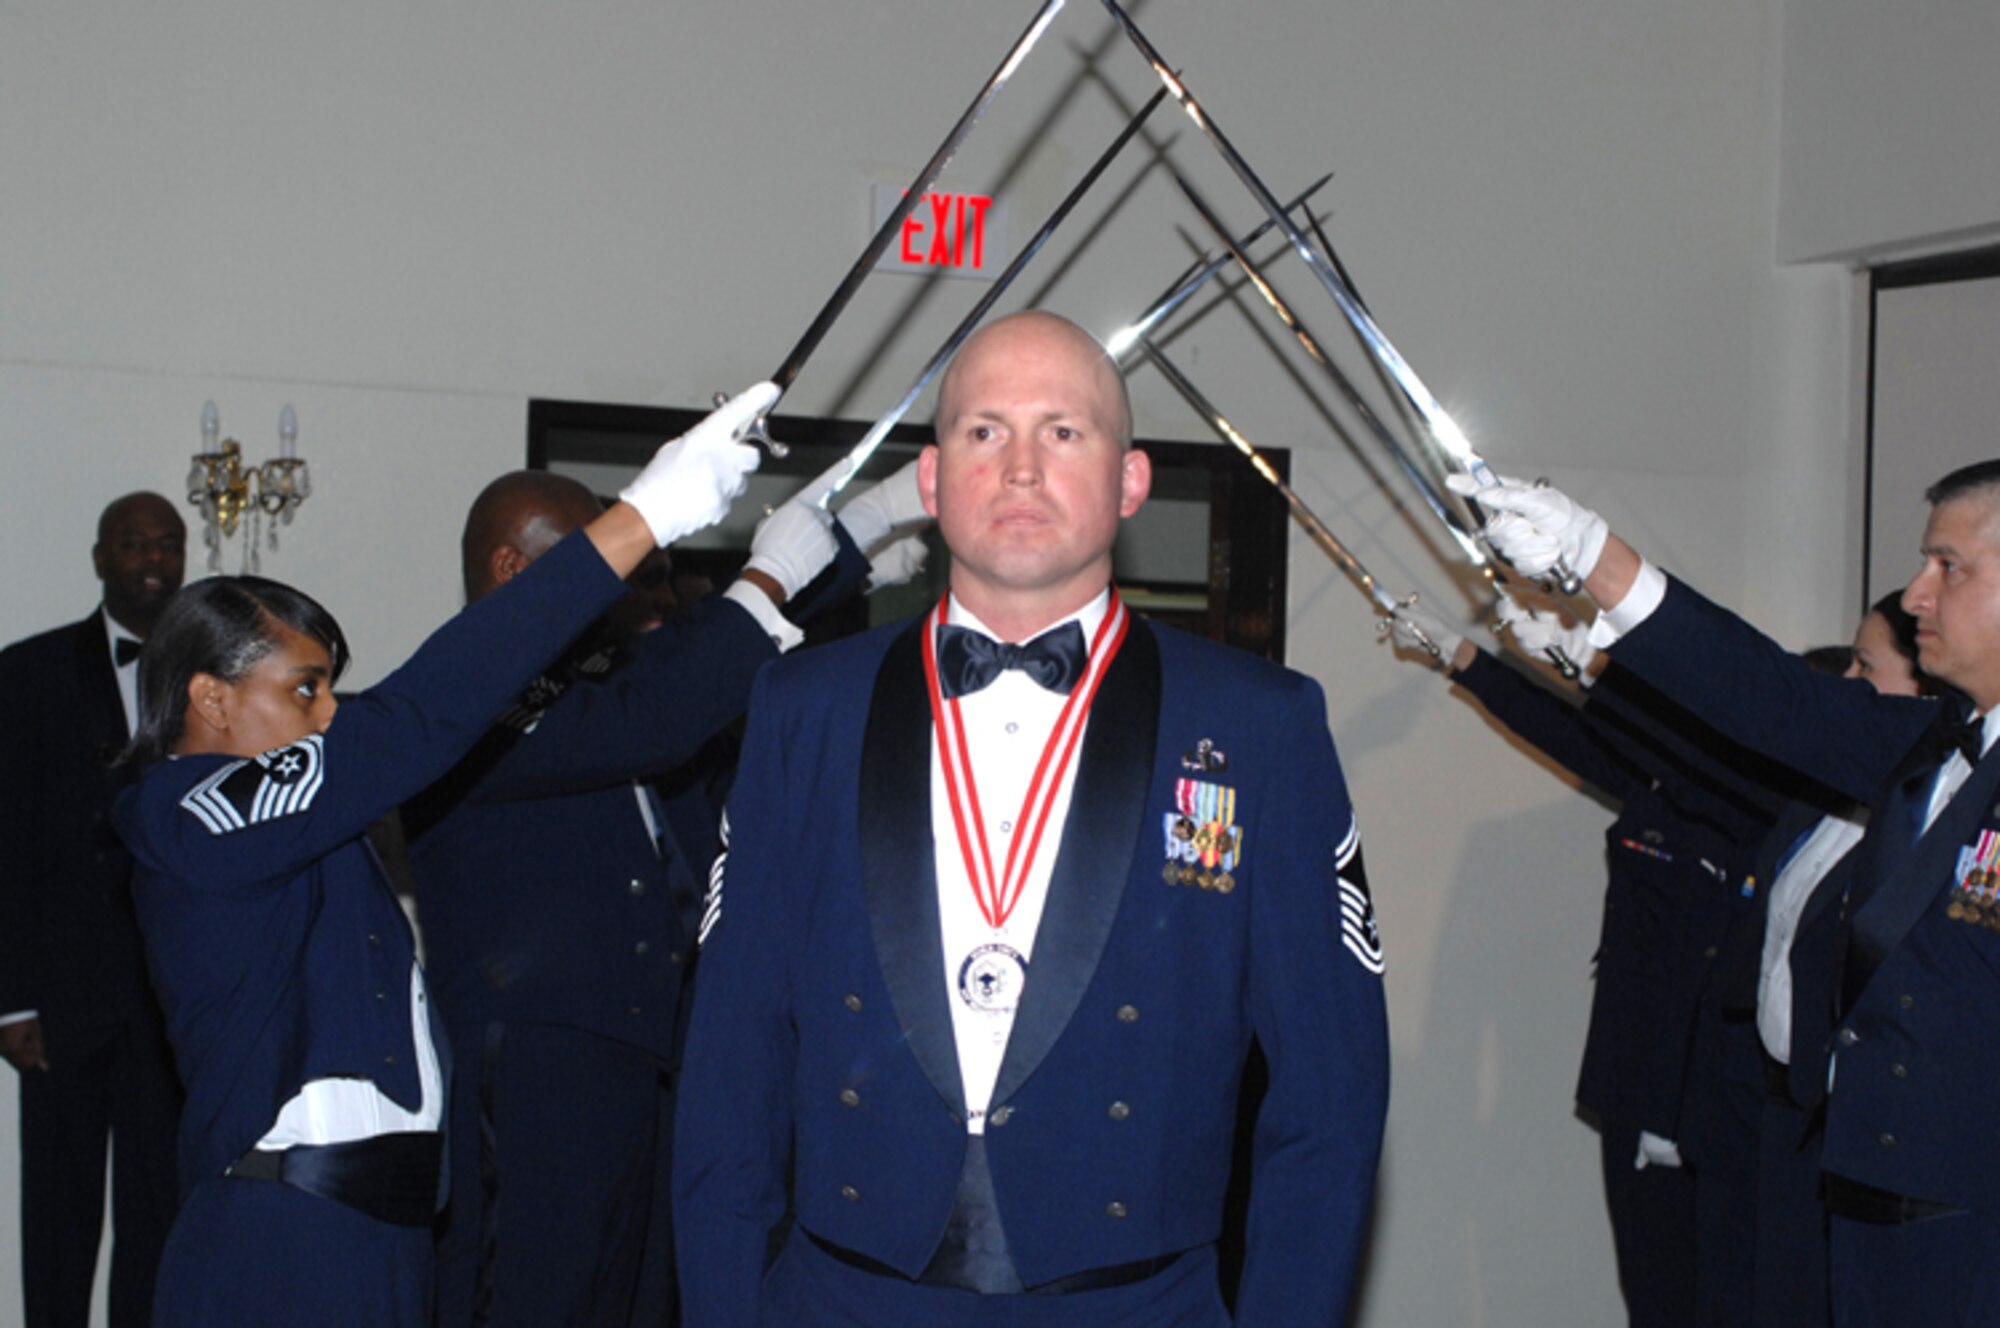 Senior Master Sgt. Steven Lantz from the 39th Operations Squadron passes through the Honor Guard cordon of swords during the Chief Induction Ceremony Feb. 9 at the Consolidatedd Club. (U. S. Air Force Photo by Technical Sergeant Shirley Henderson)